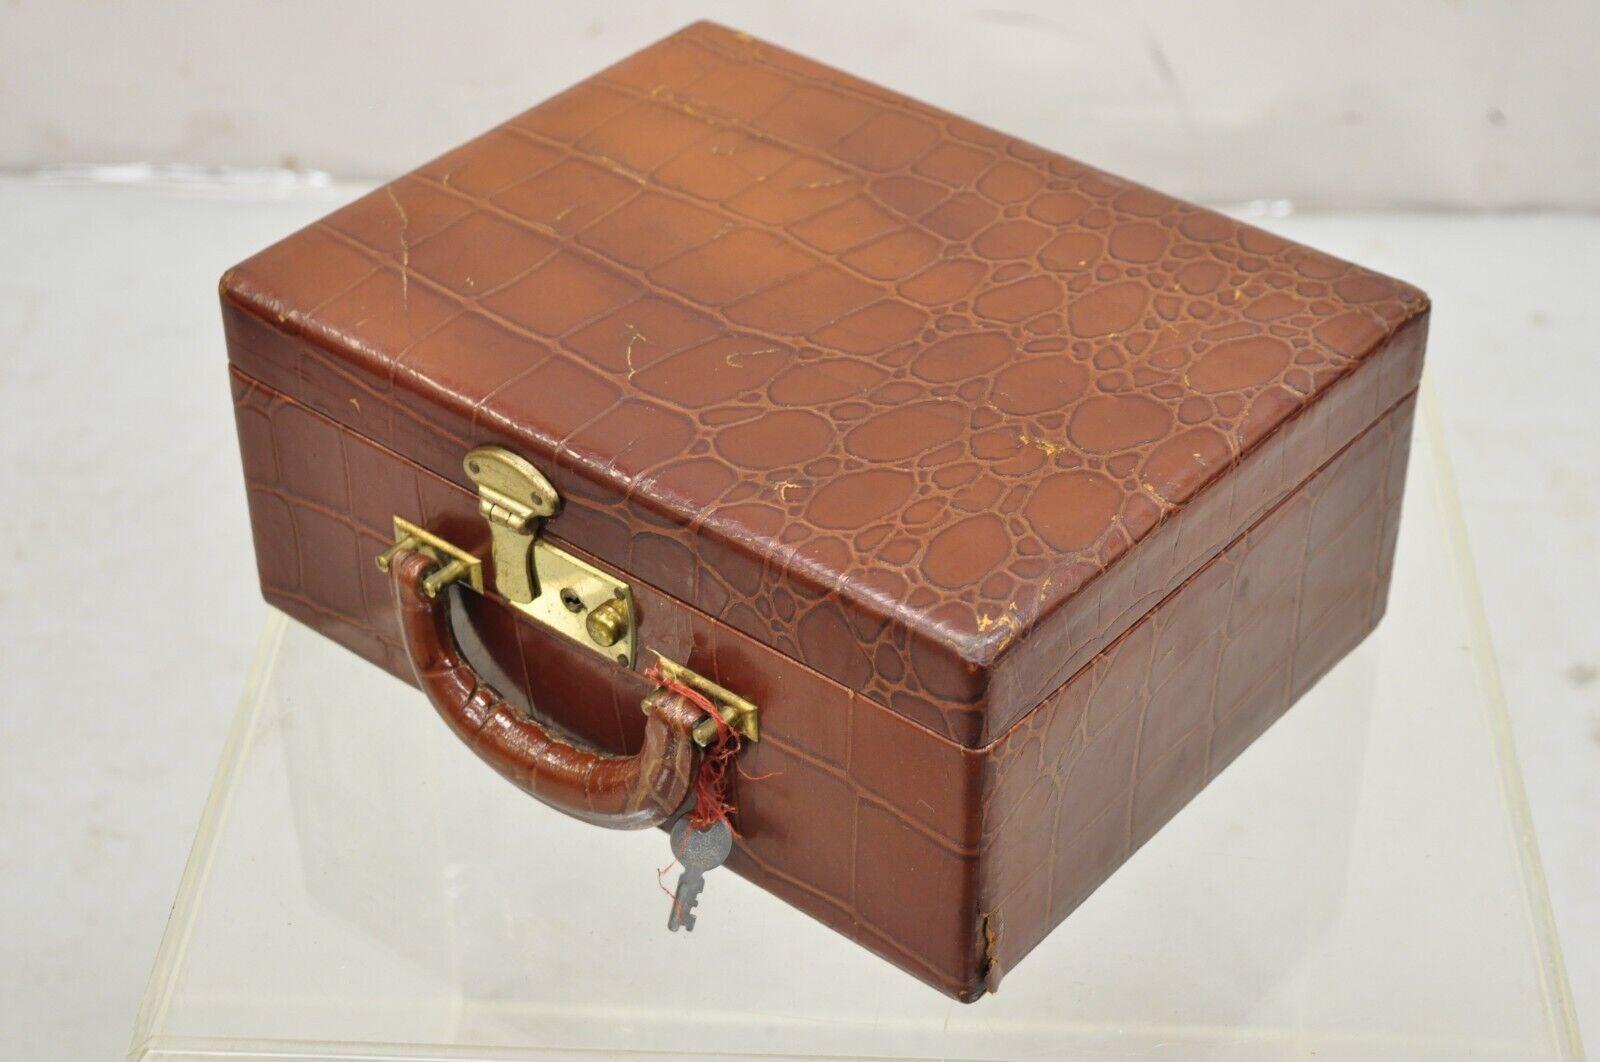 Vintage Brown Leather Art Deco Crocodile Embossed Small Toiletry Travel Vanity Case. Item features has a working lock and key, original label, very nice vintage case. Early 1900s. Measurements: 5